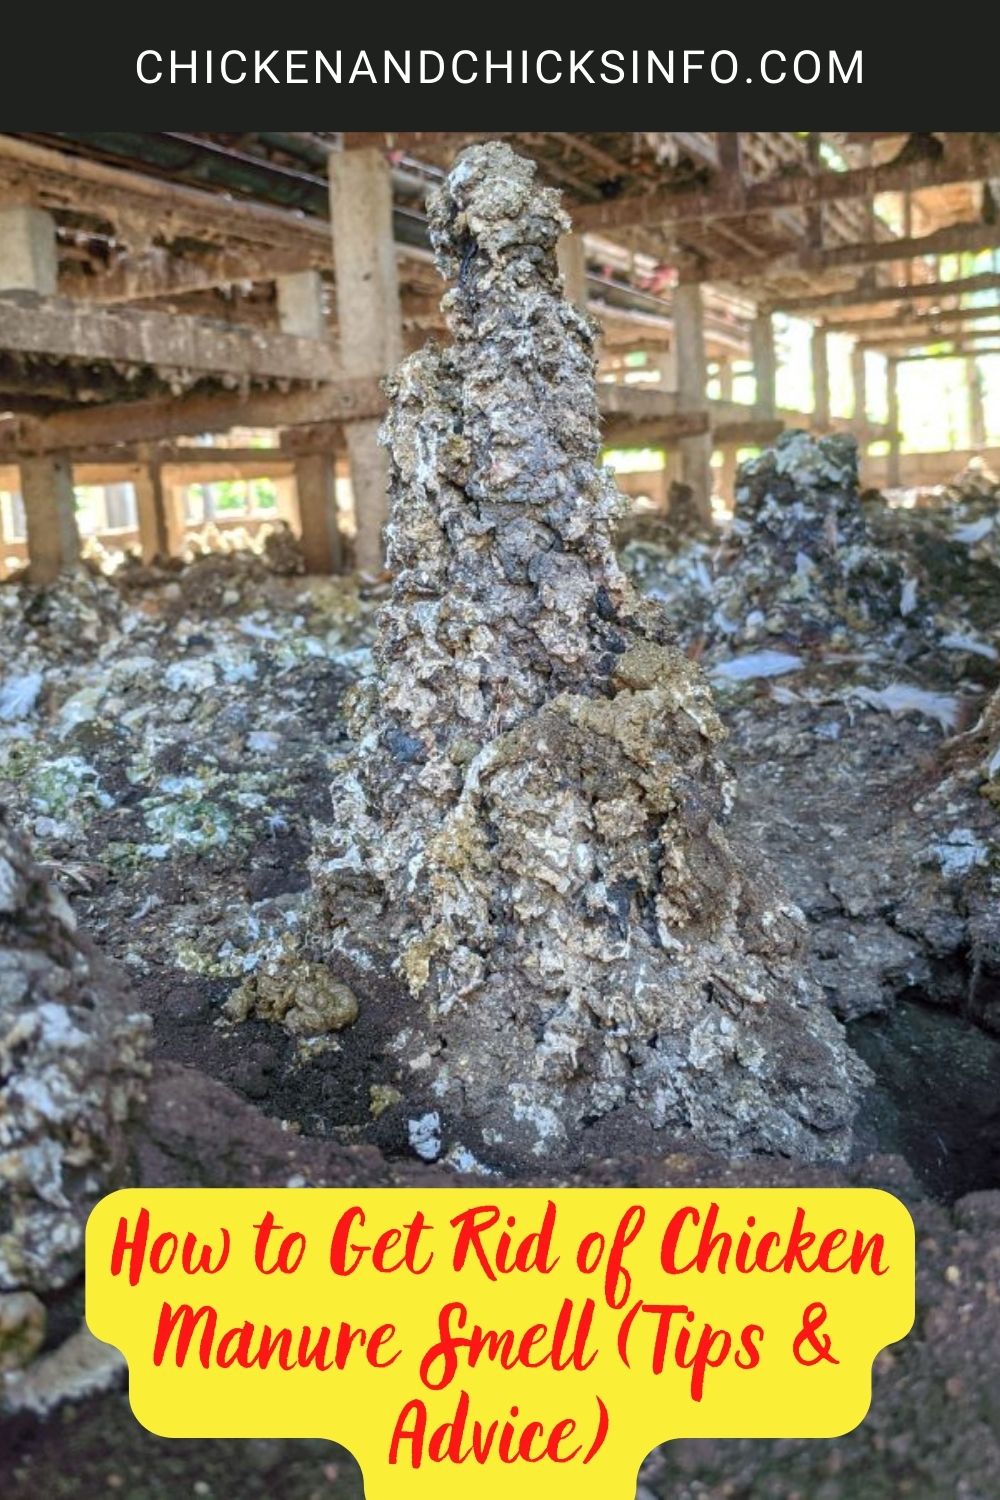 How to Get Rid of Chicken Manure Smell (Tips & Advice) poster.
